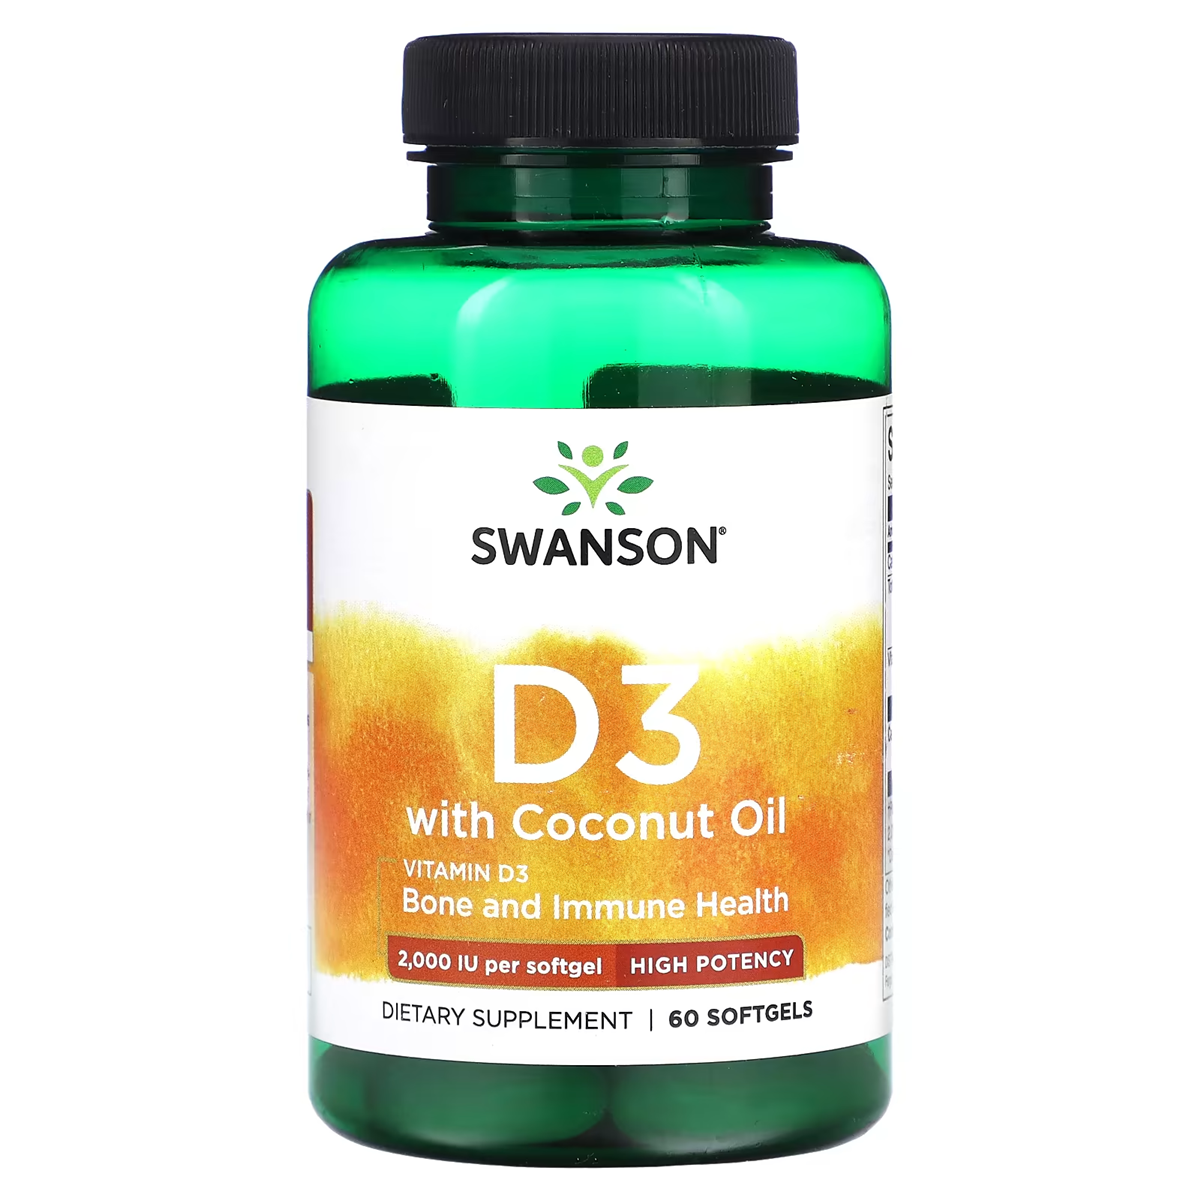 Swanson Ultra  Vitamin D3 with Coconut Oil - High Potency 2,000 IU (50 mcg) / 60 Softgels